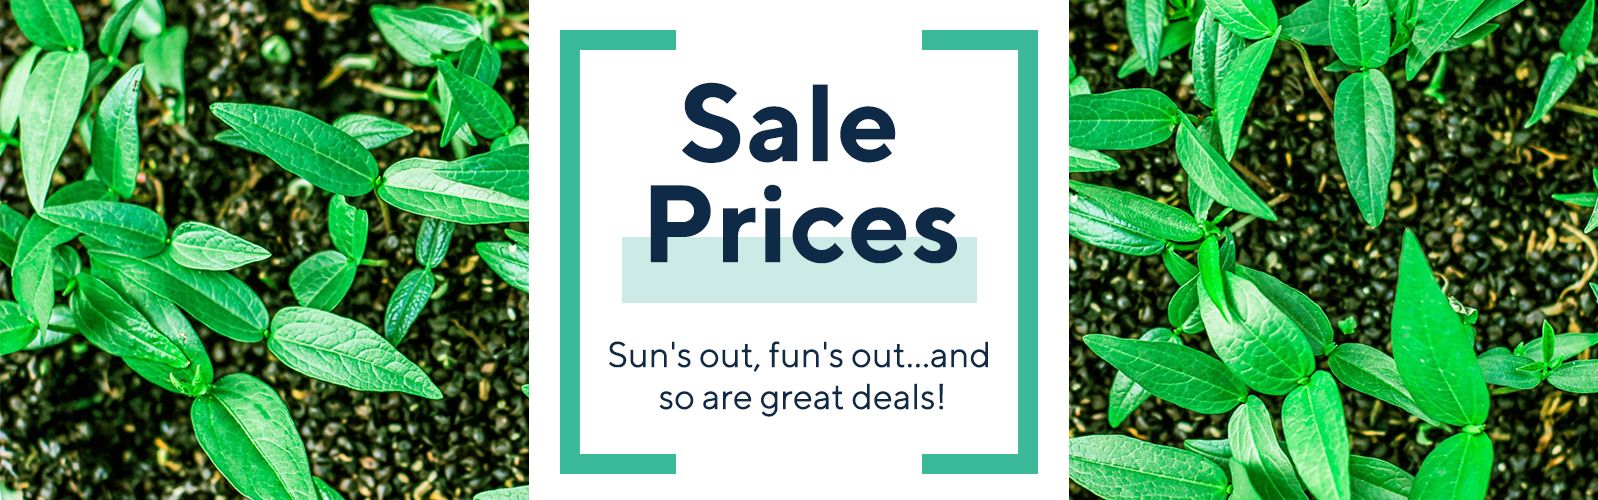 Sale Prices  Sun's out, fun's out…and so are great deals!